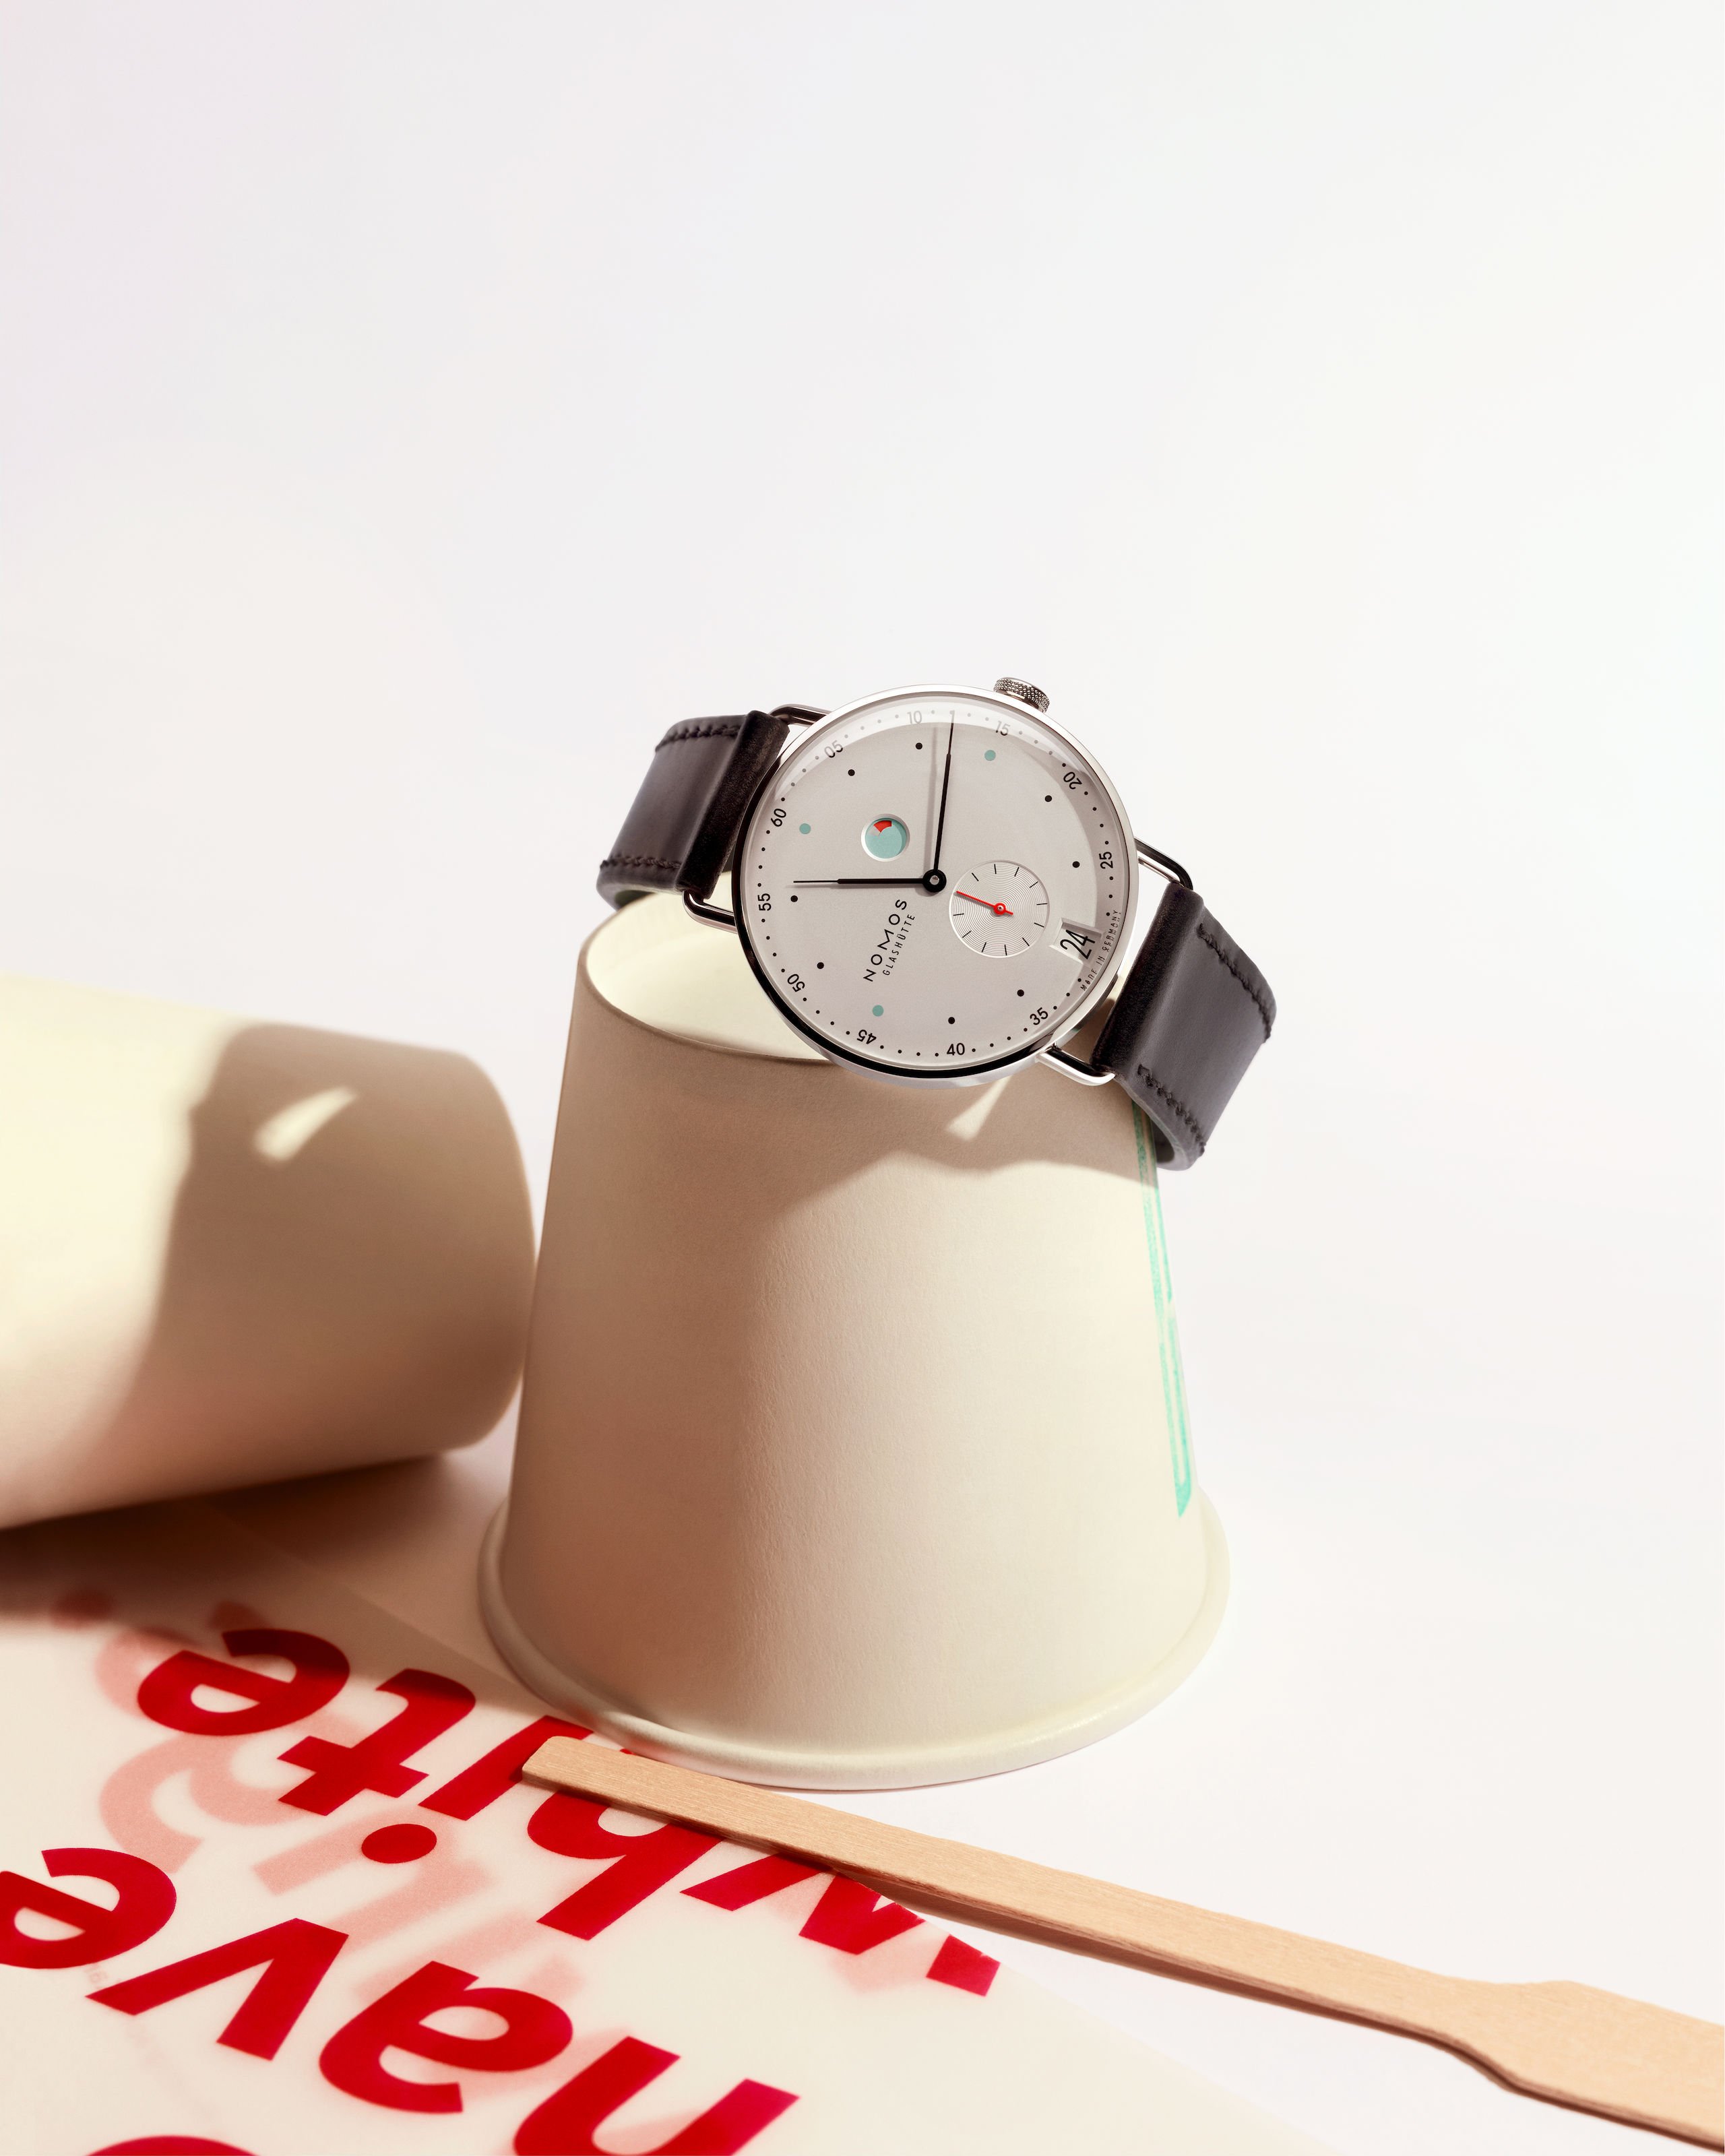 NOMOS watches are among the finest German timepieces available